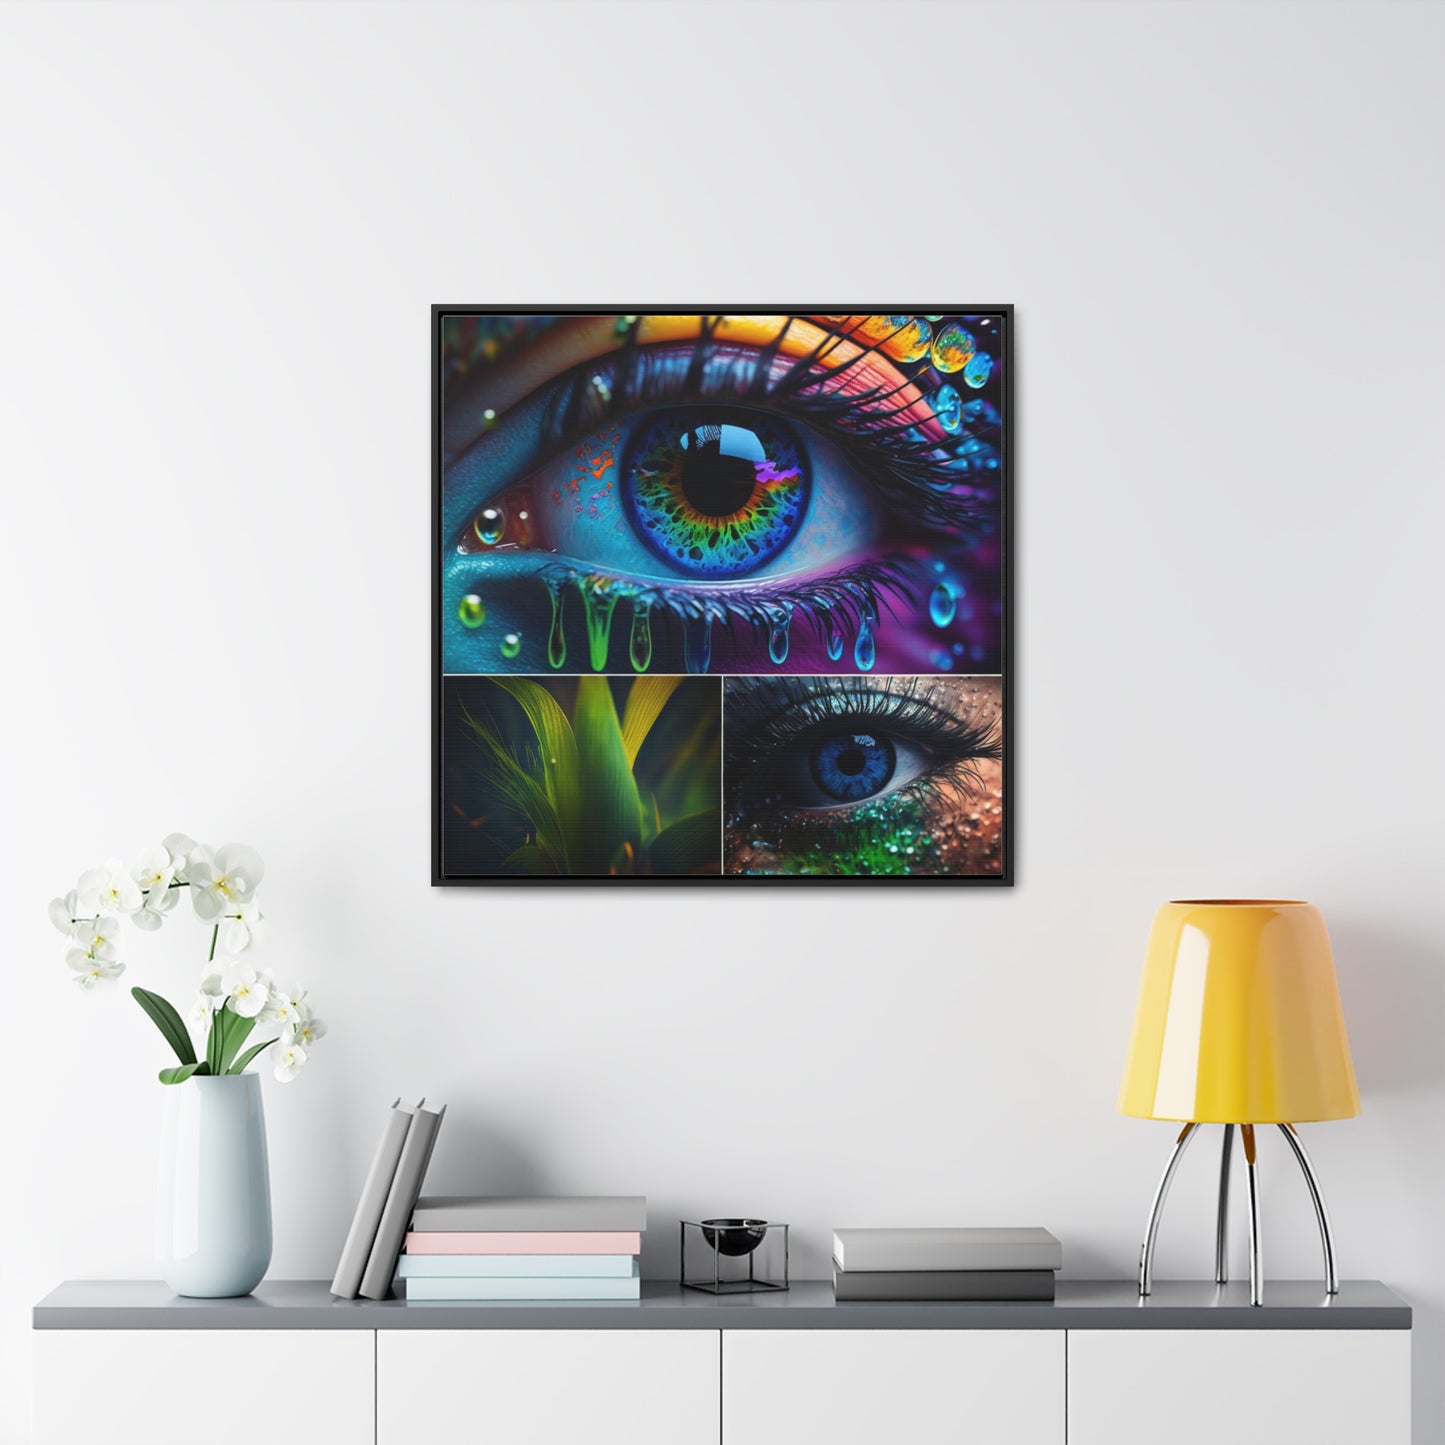 Gallery Canvas Wraps, Square Frame Neon Florescent Glow 3